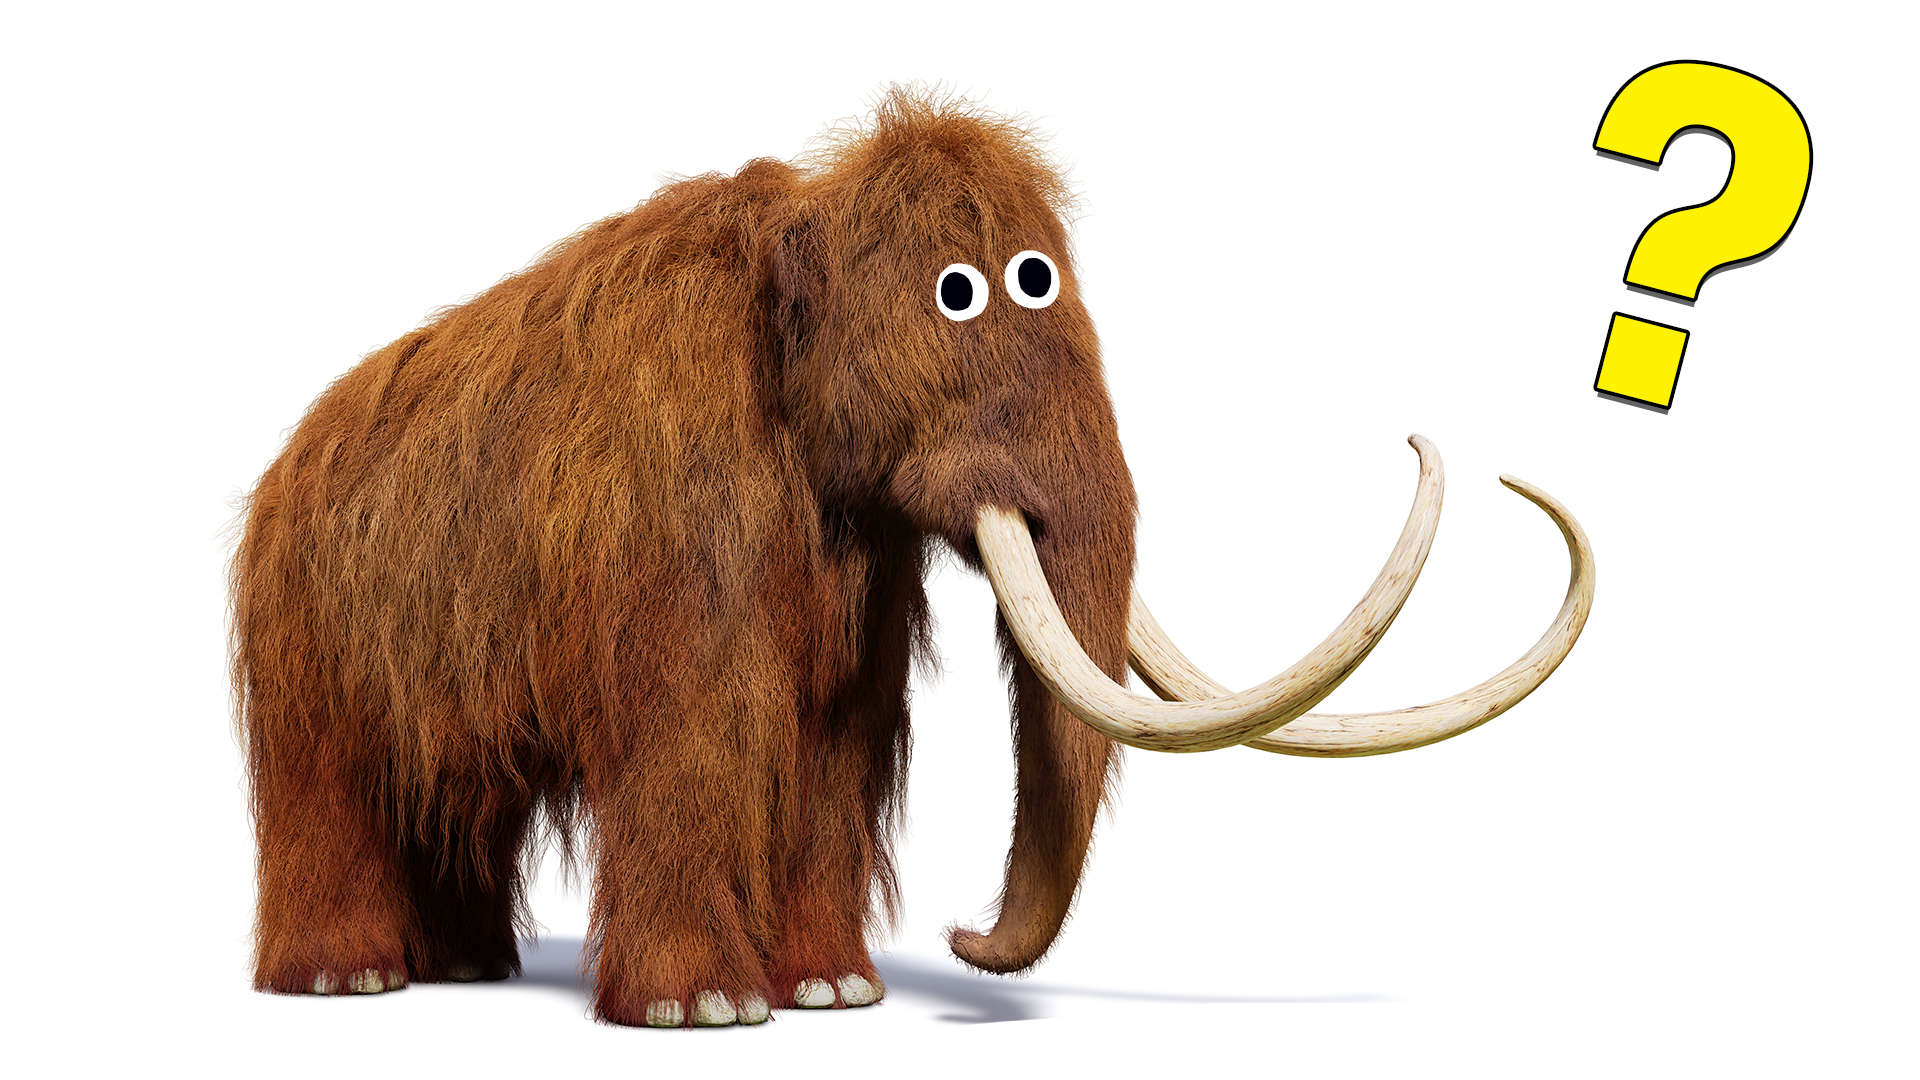 A wooly mammoth looks confused